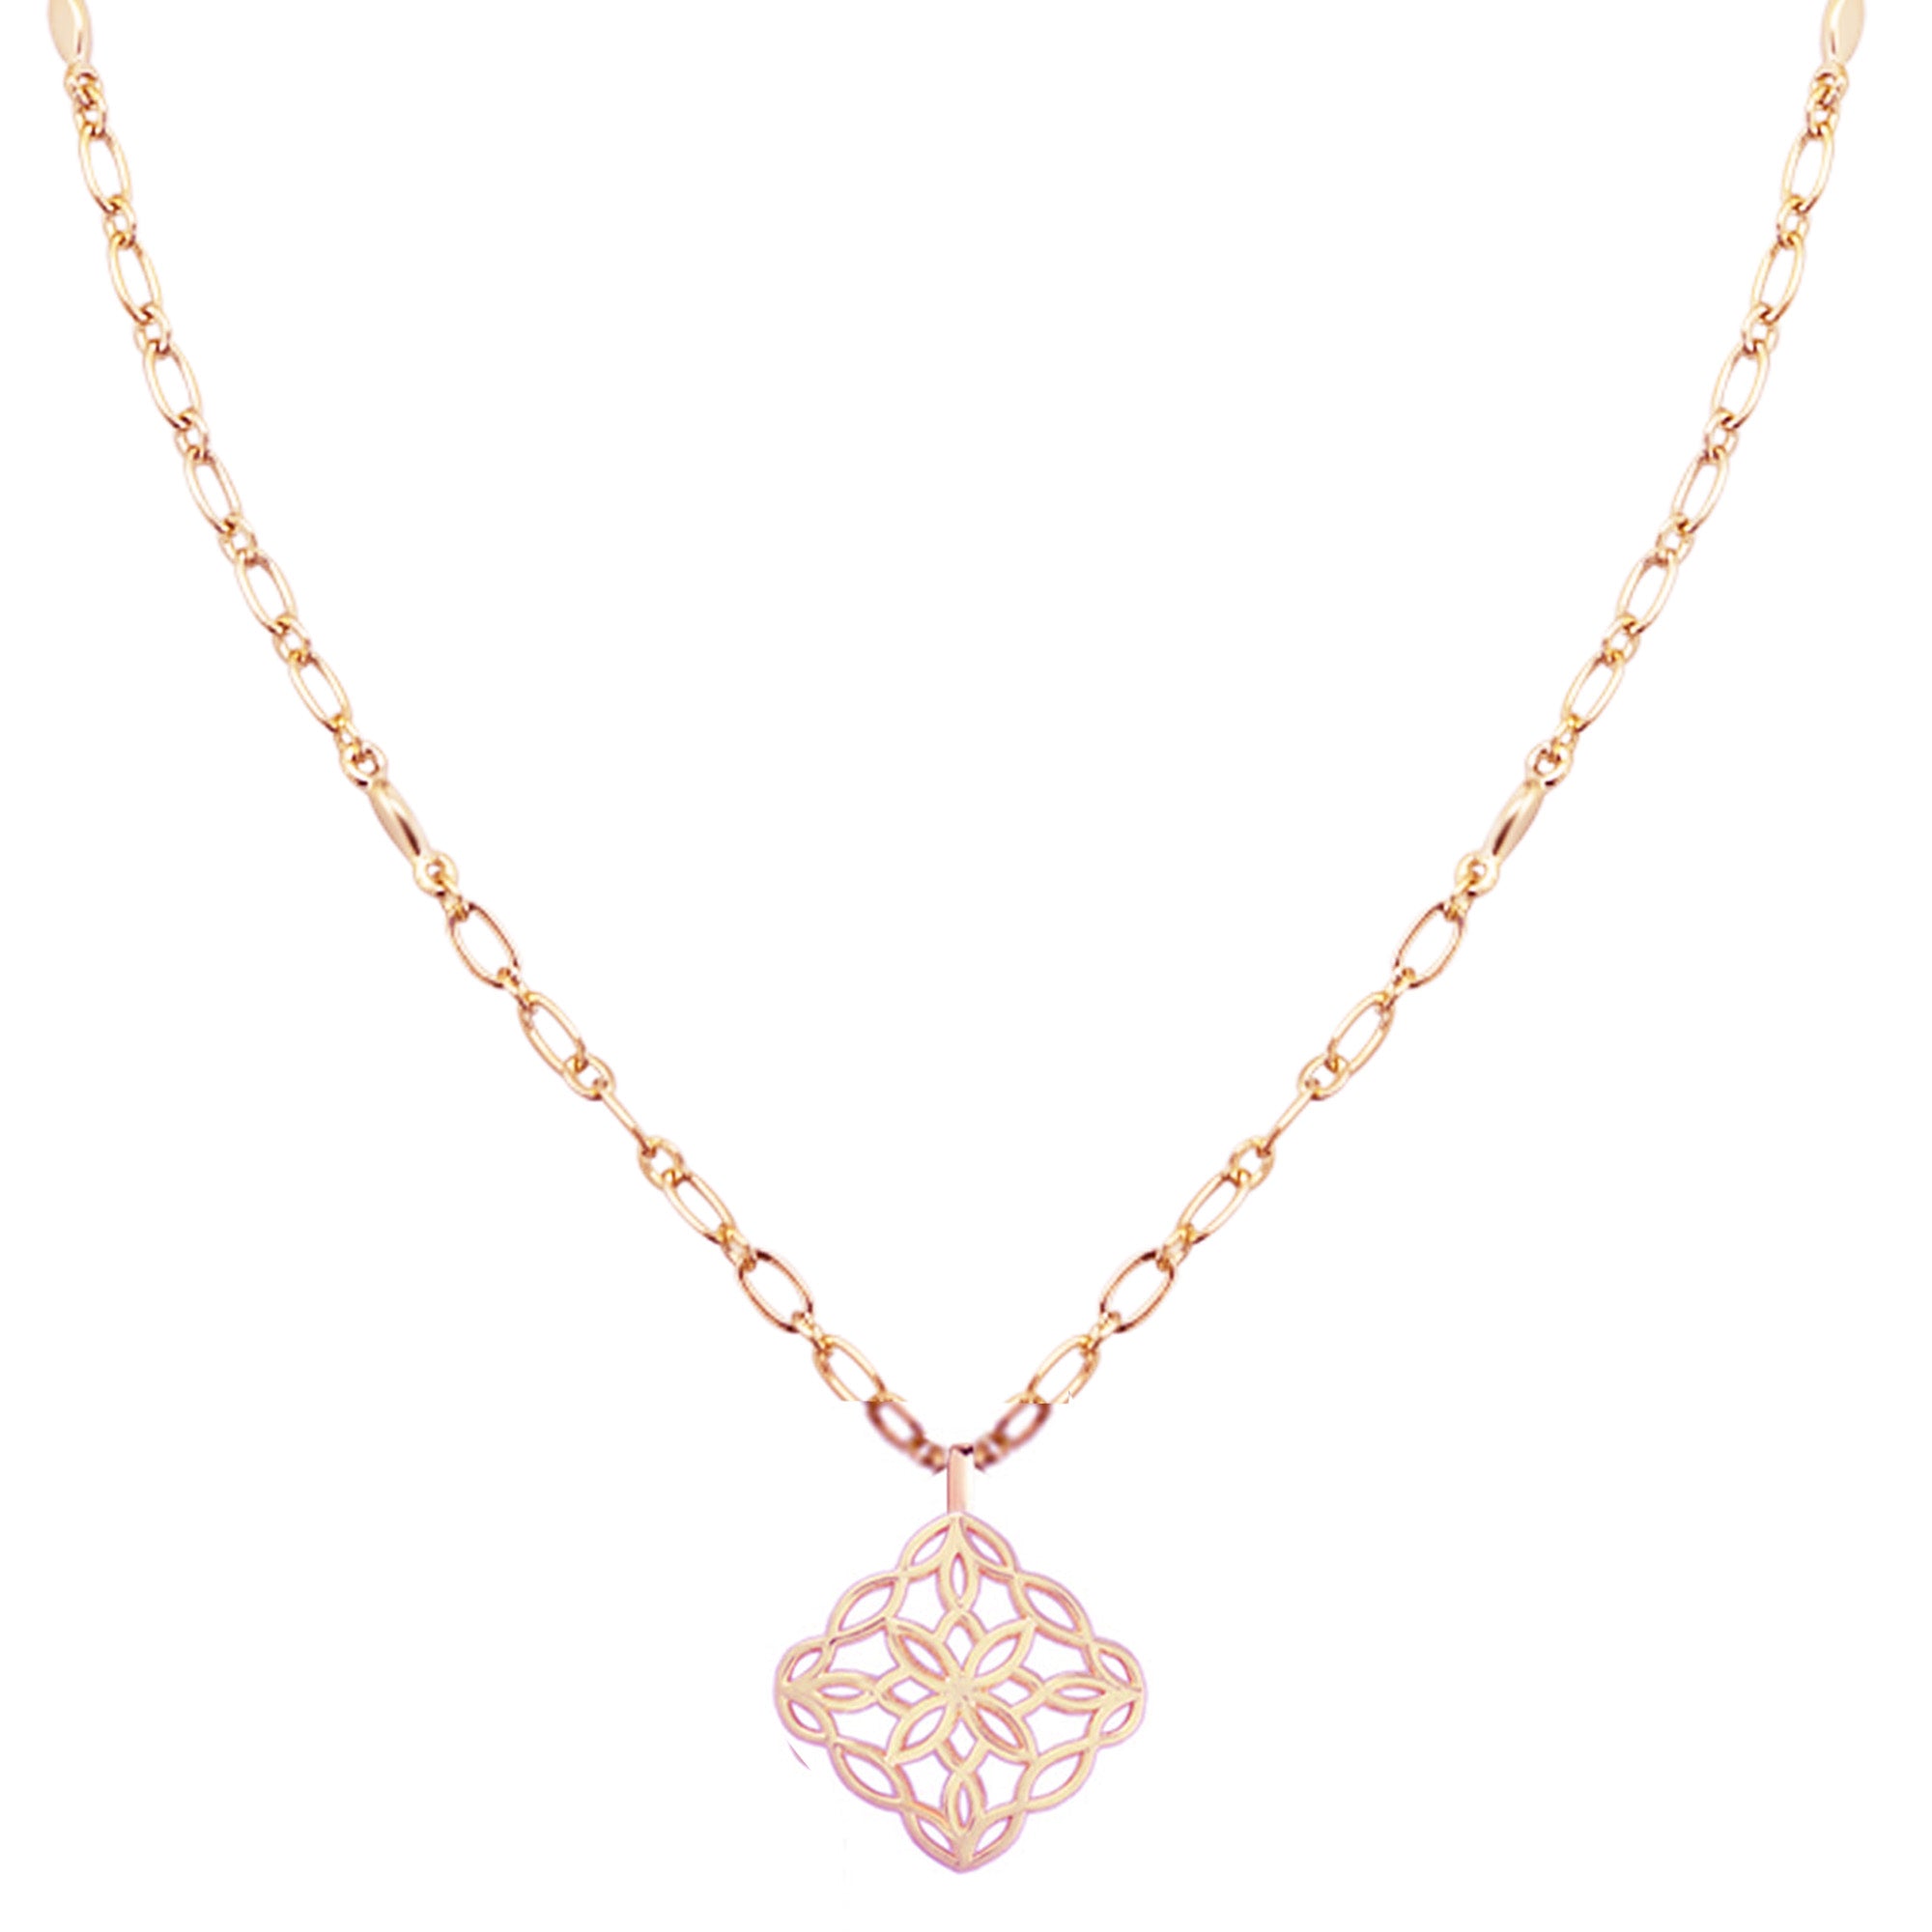 Bloom Drop Necklace in Rose Gold